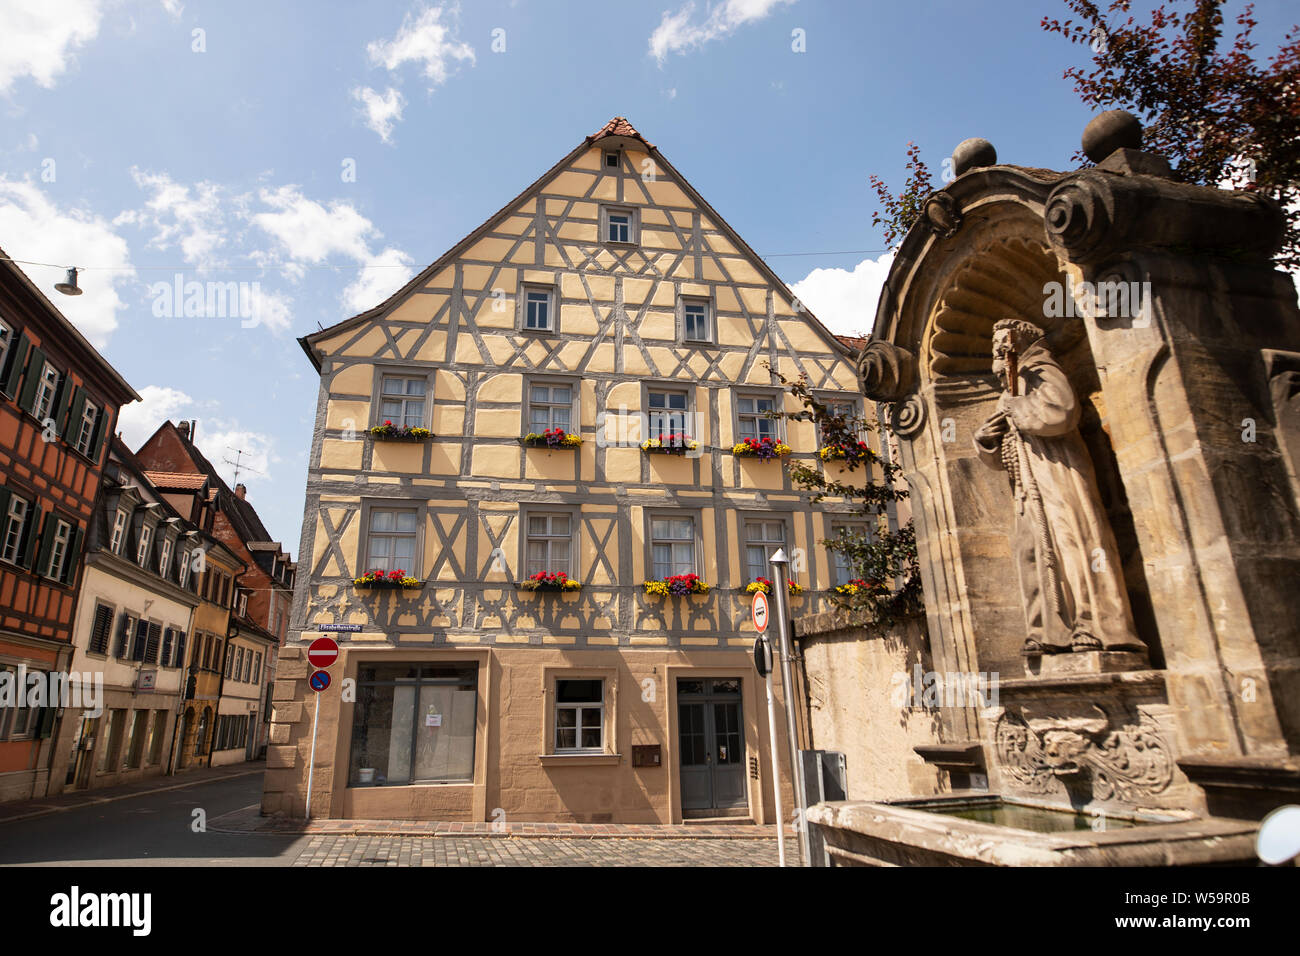 A traditional house (Bauernhaus or farmhouse) and the water fountain outside the Elisabethenkirche in the Bavarian city of Bamberg, Germany. Stock Photo